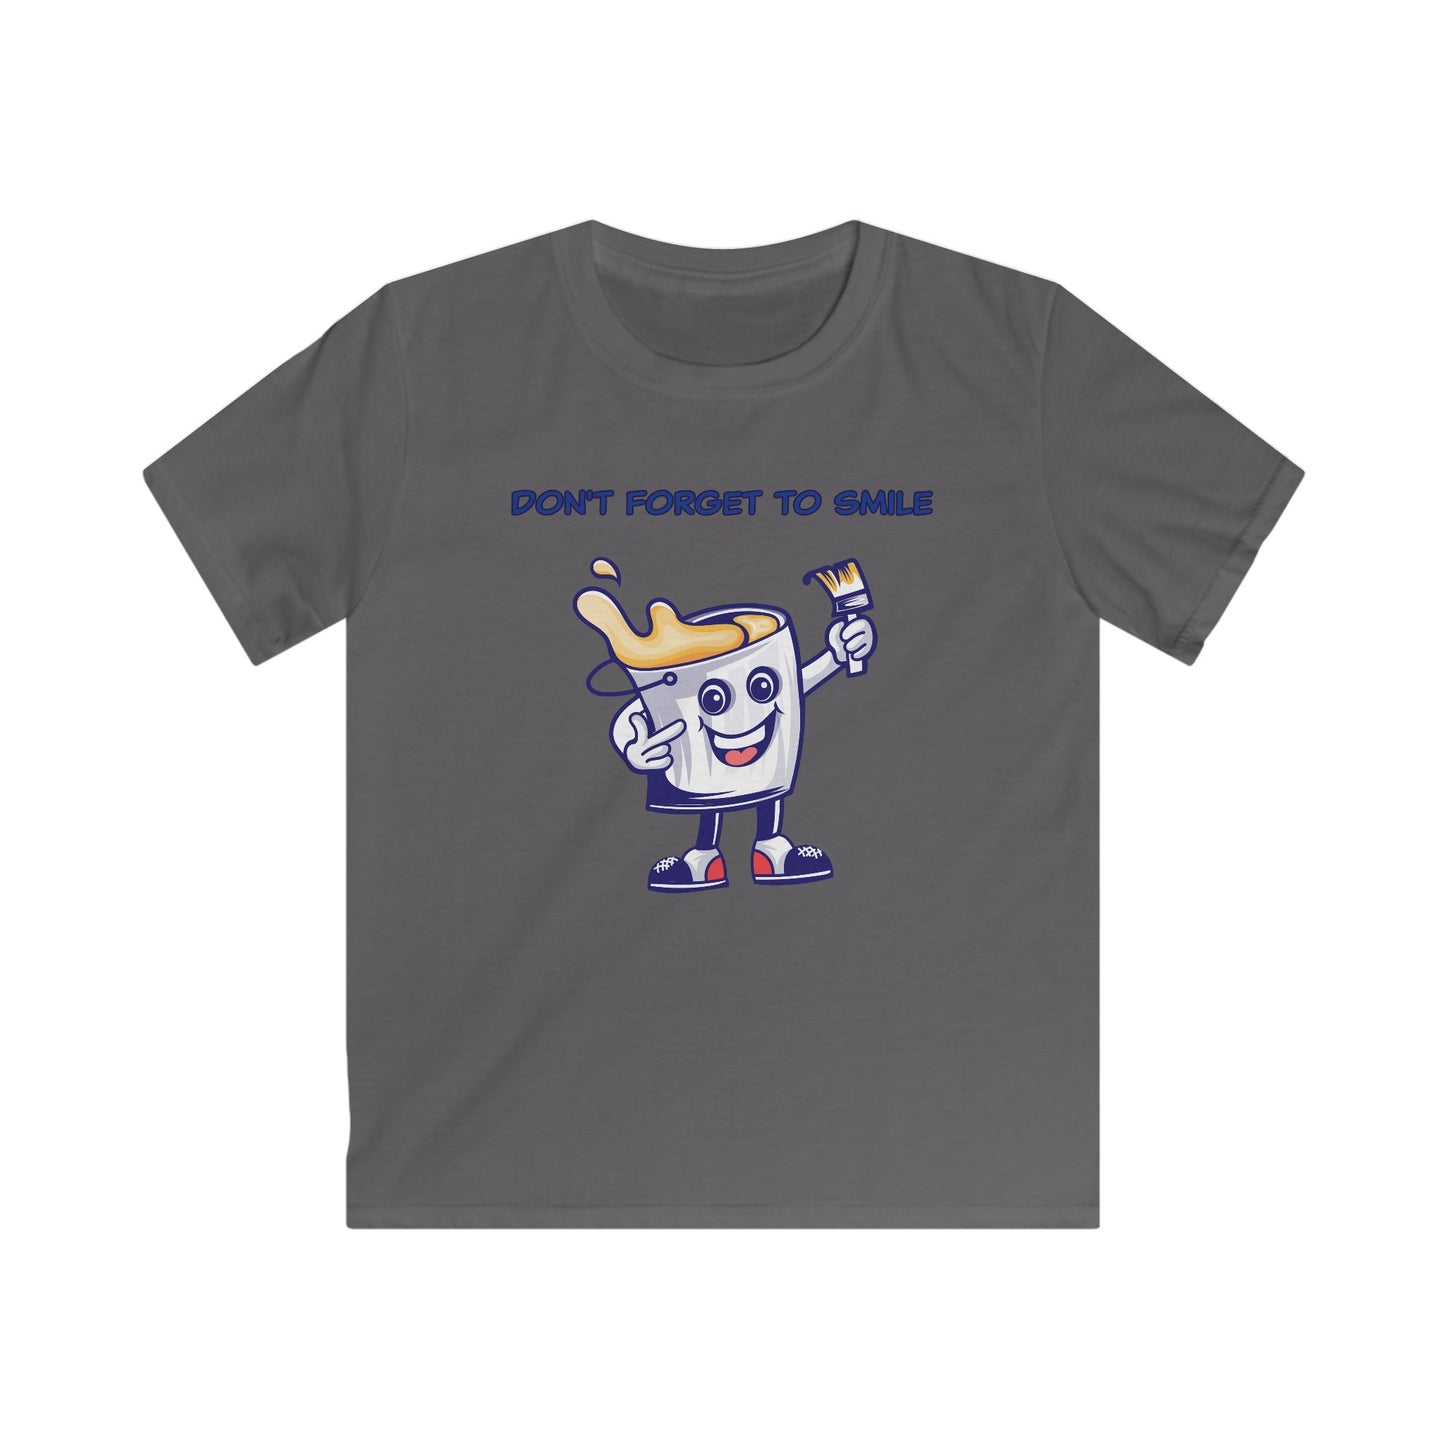 Don't Forget to Smile. Kids Softstyle Tee